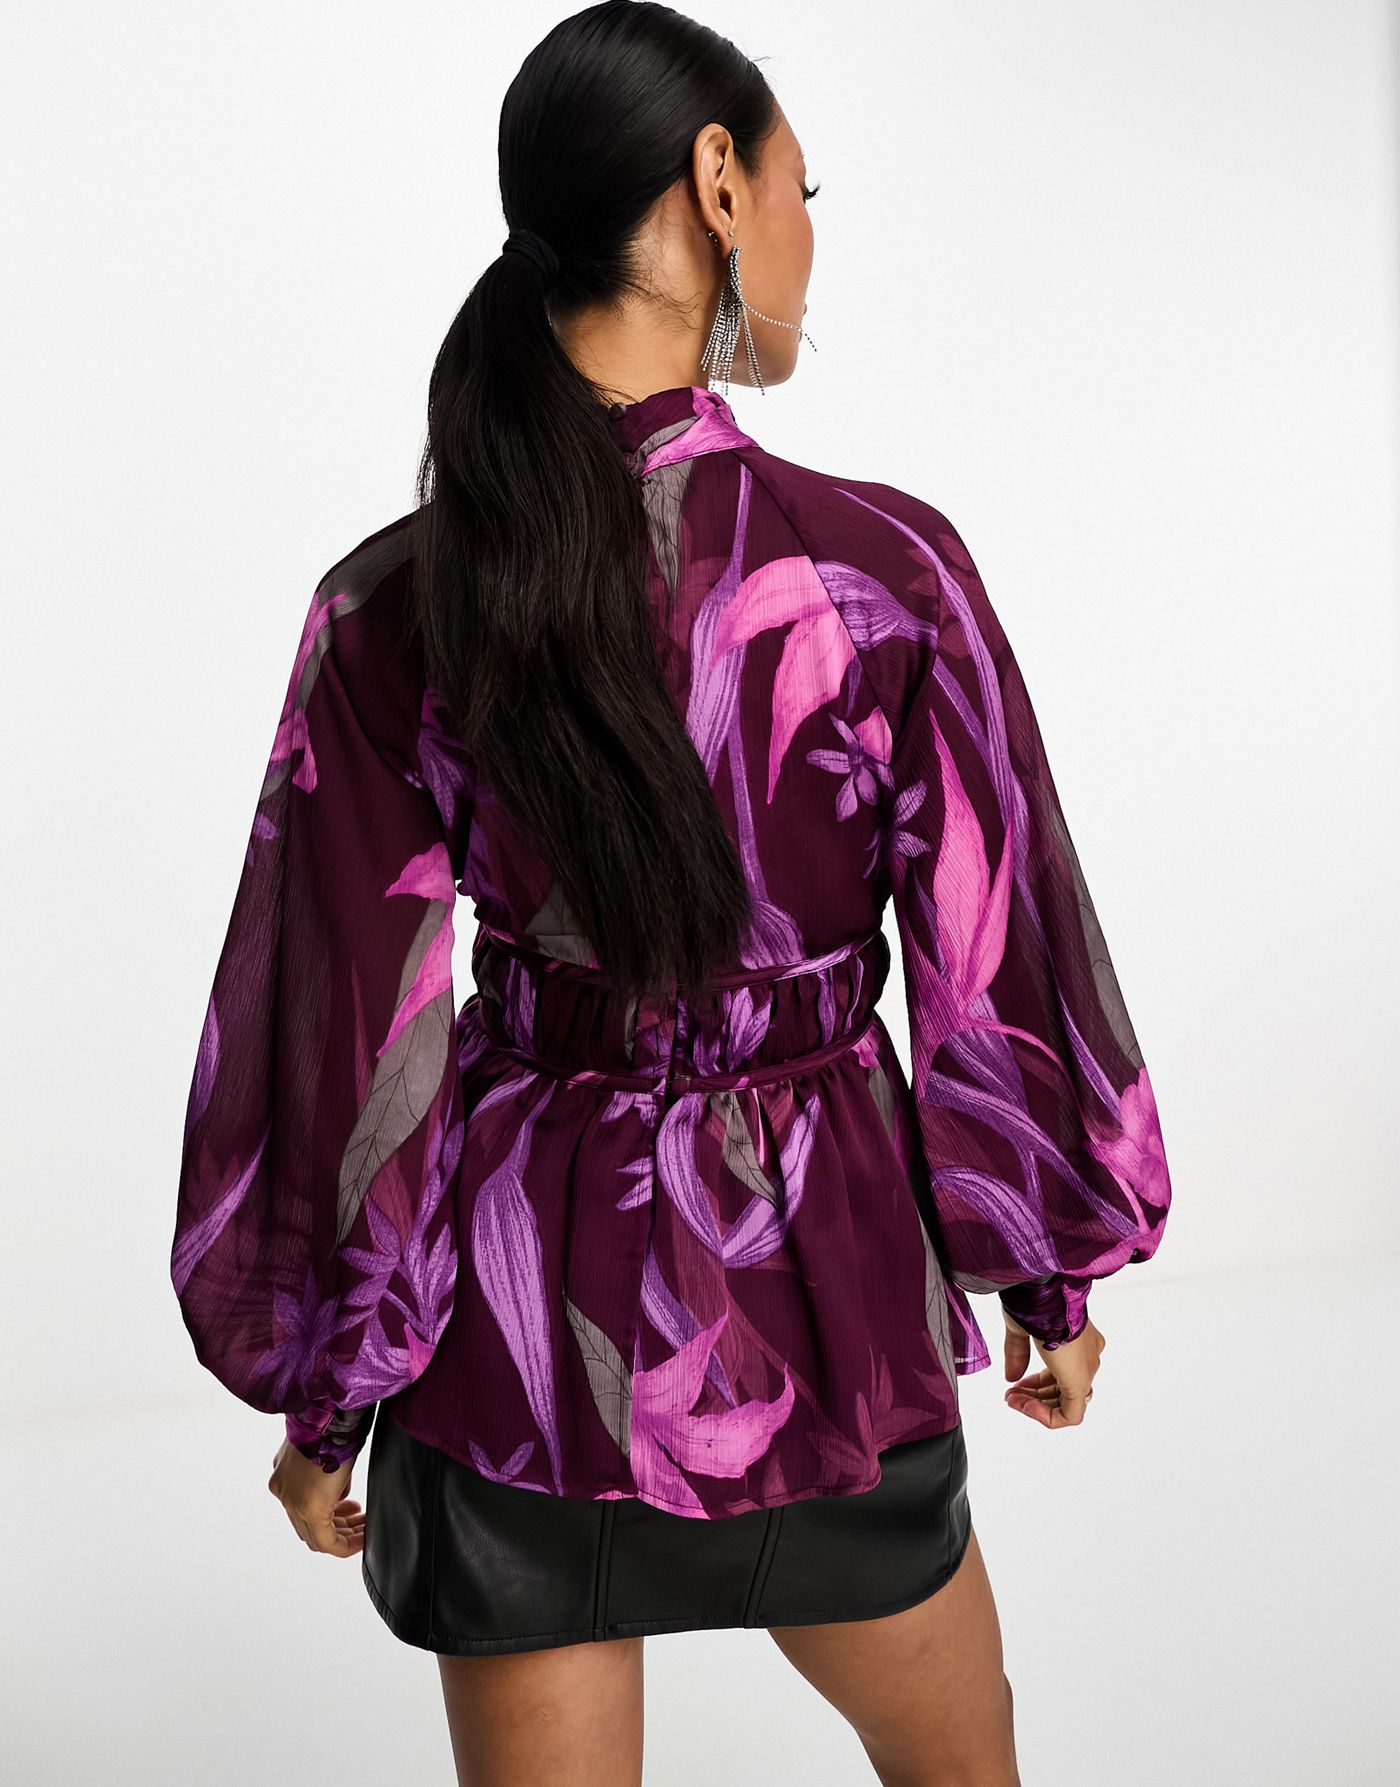 ASOS DSEIGN high neck long sleeve blouse with peplum hem & cut out keyhole detail in bright pink & purple 